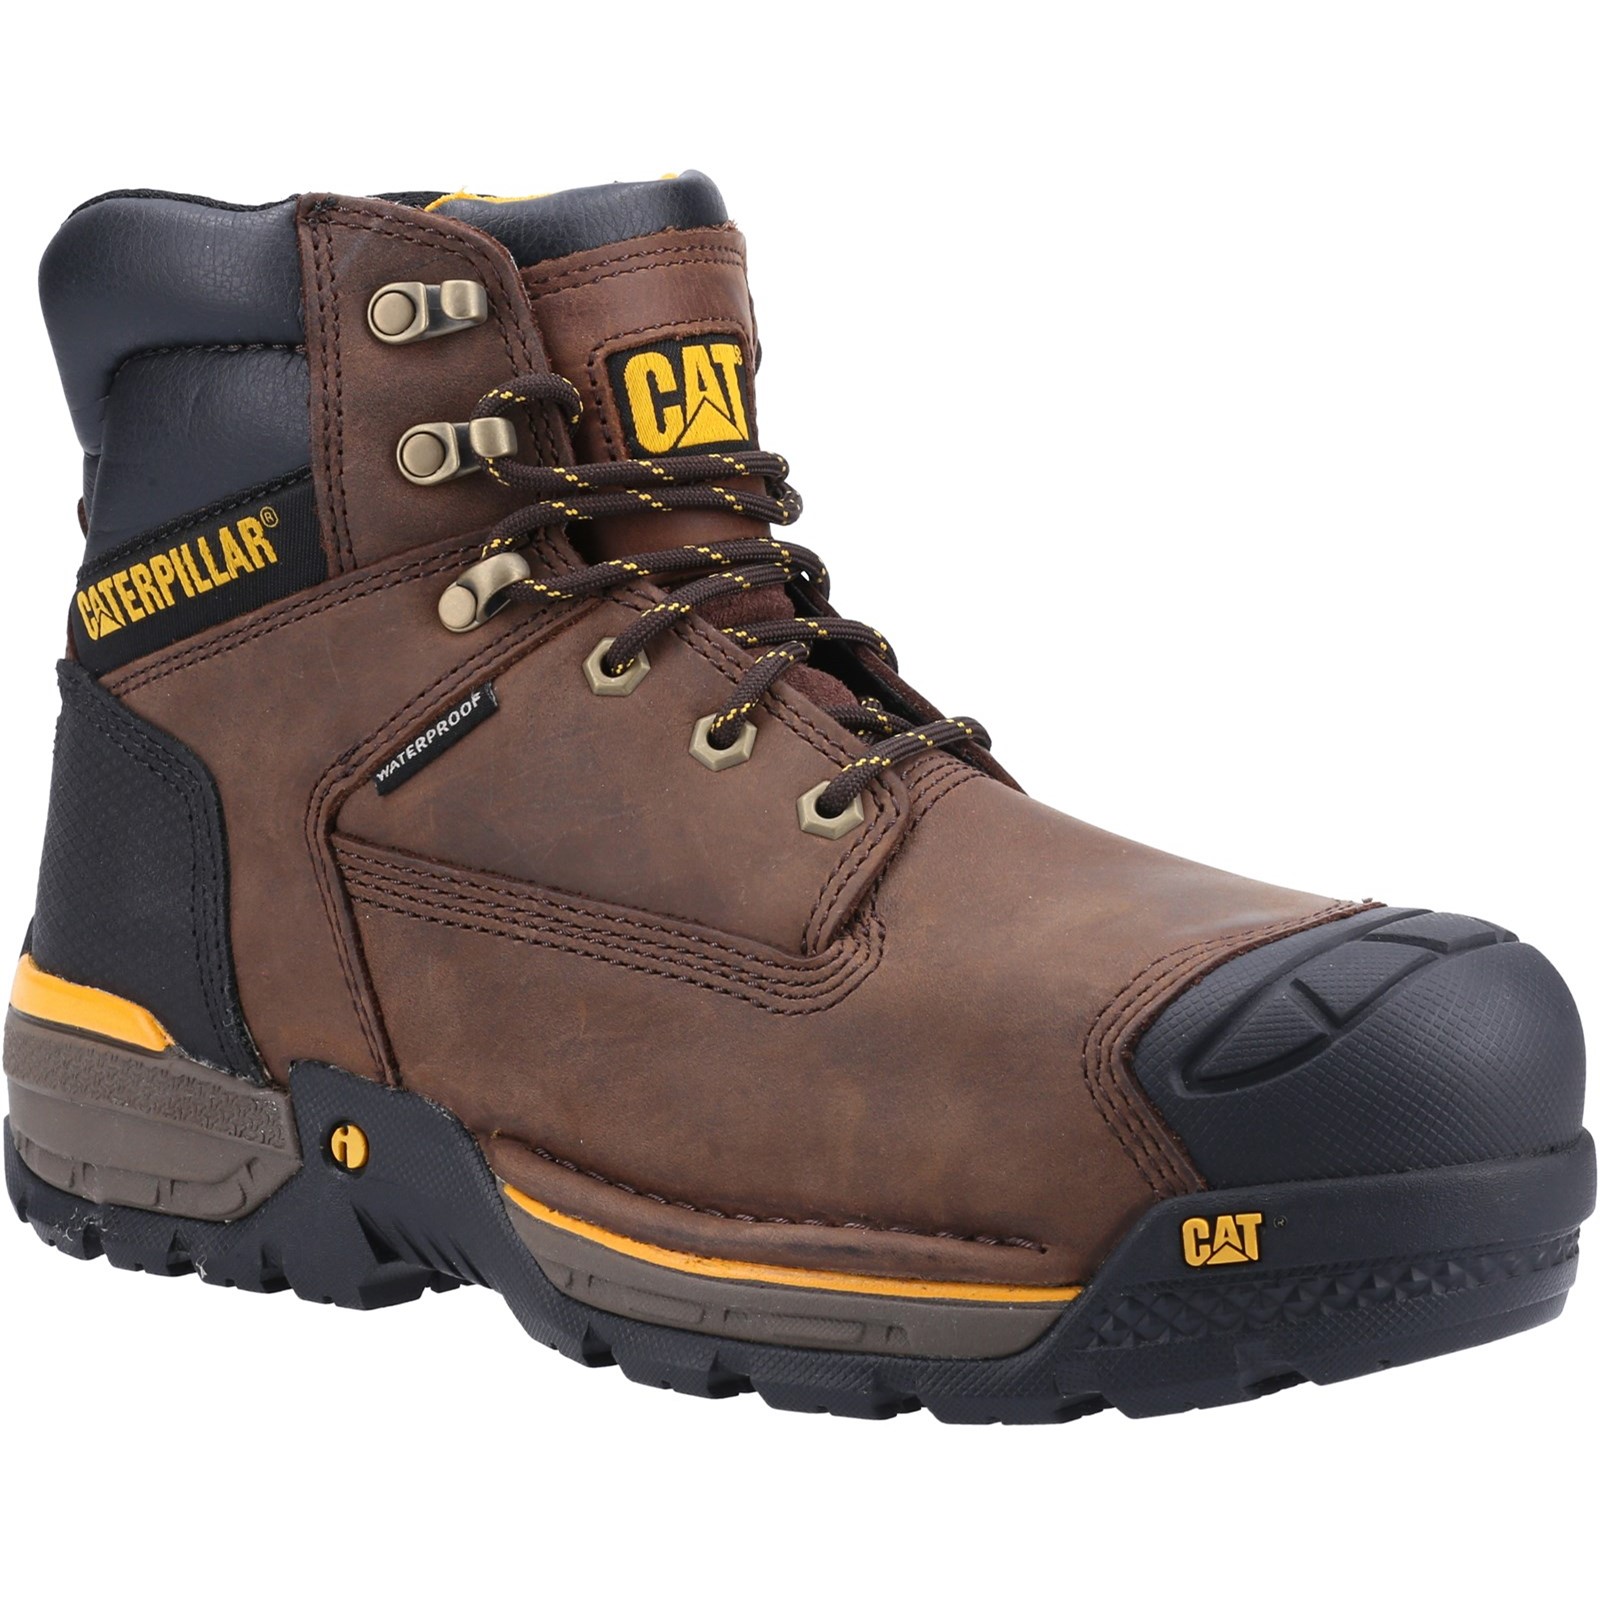 Excavator Lace Up Safety Hiker